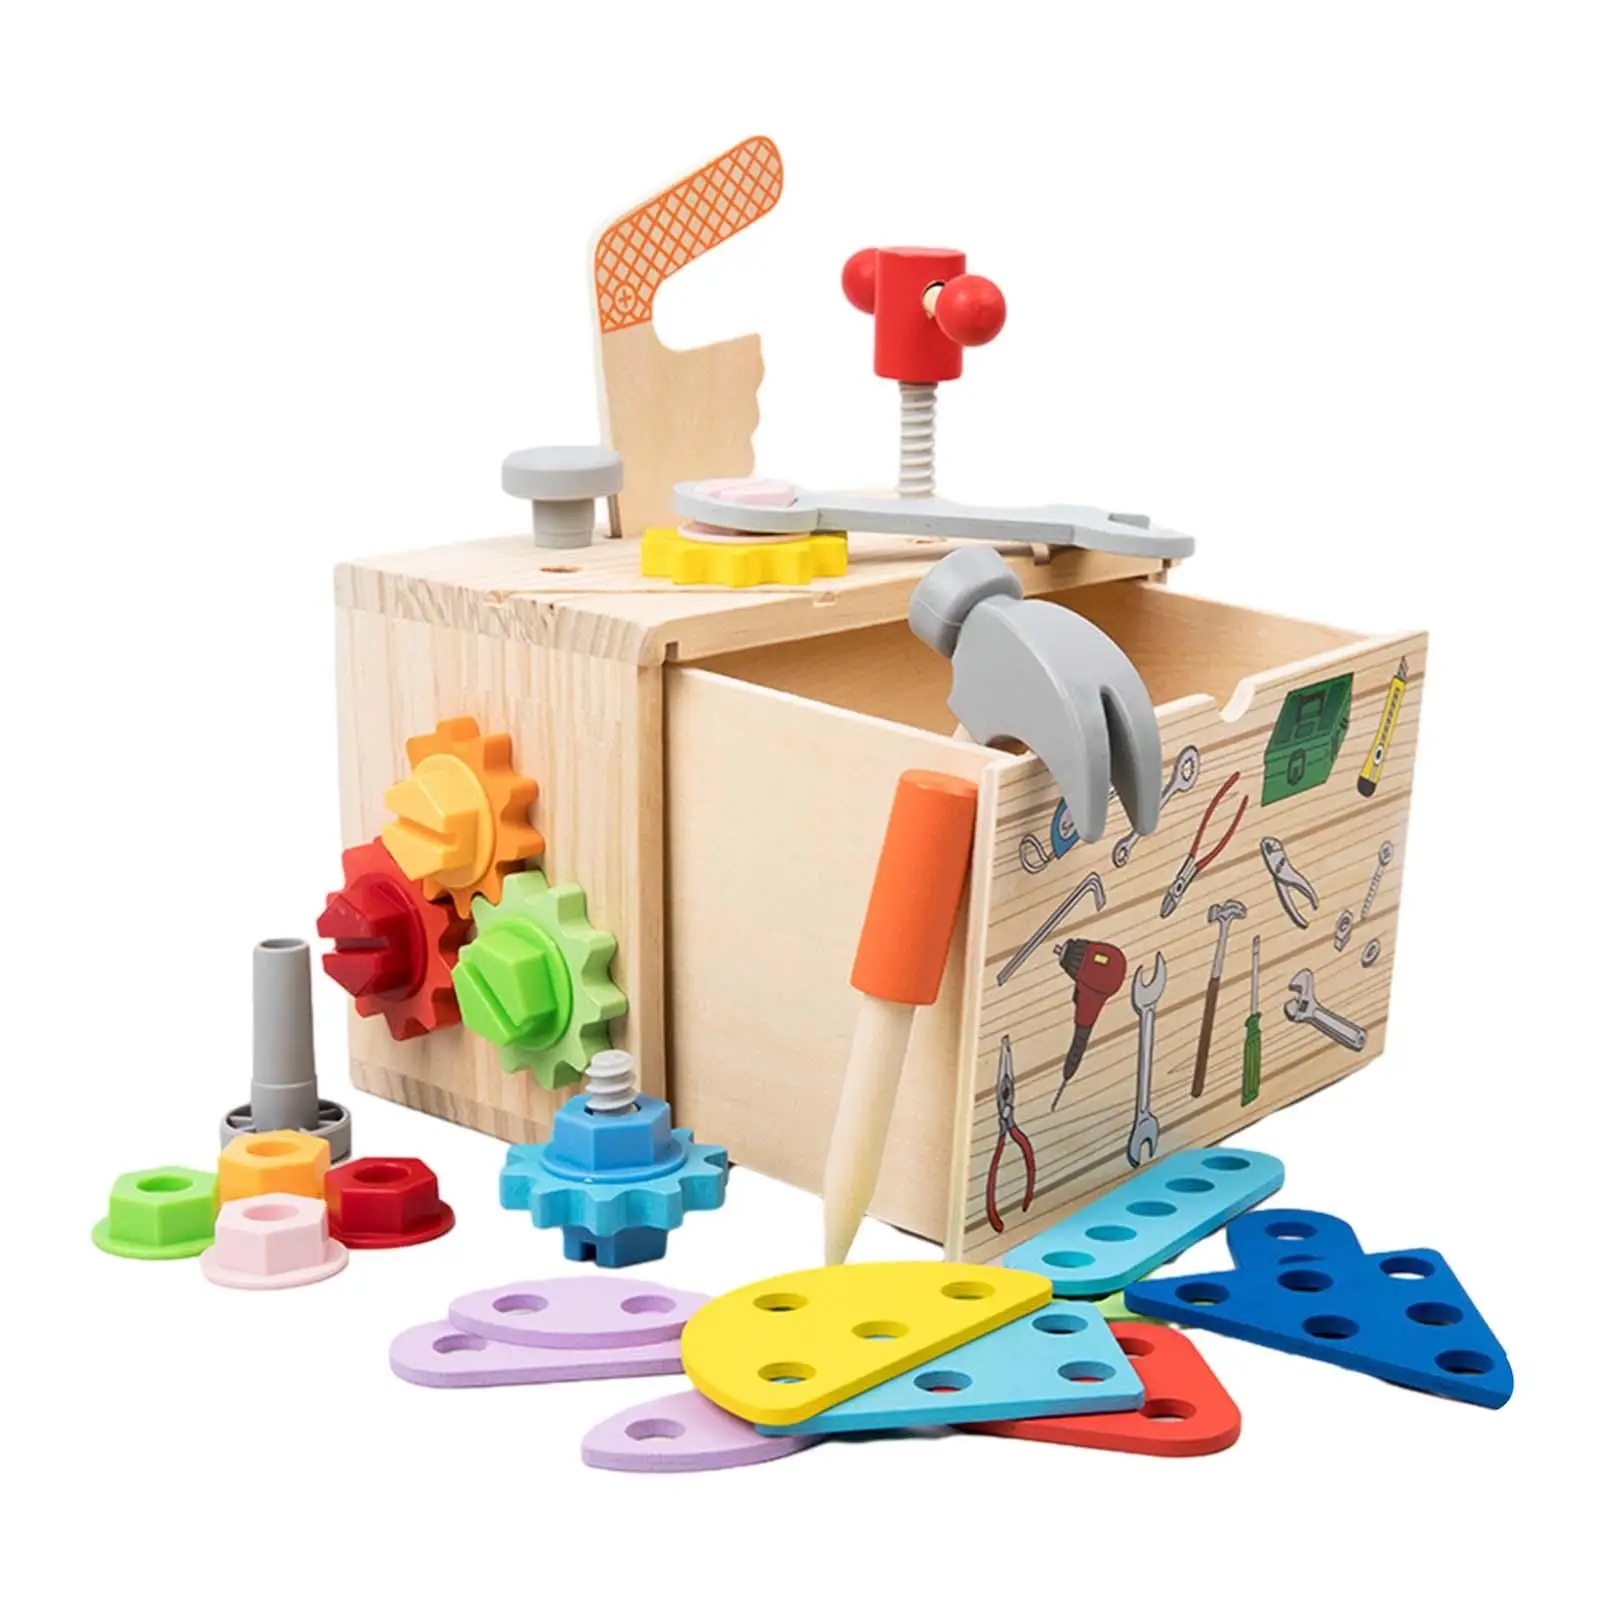 Wooden Toolbox Toys Kids Play Tool Set for Birthday Holiday 2 3 4 5 Years Old